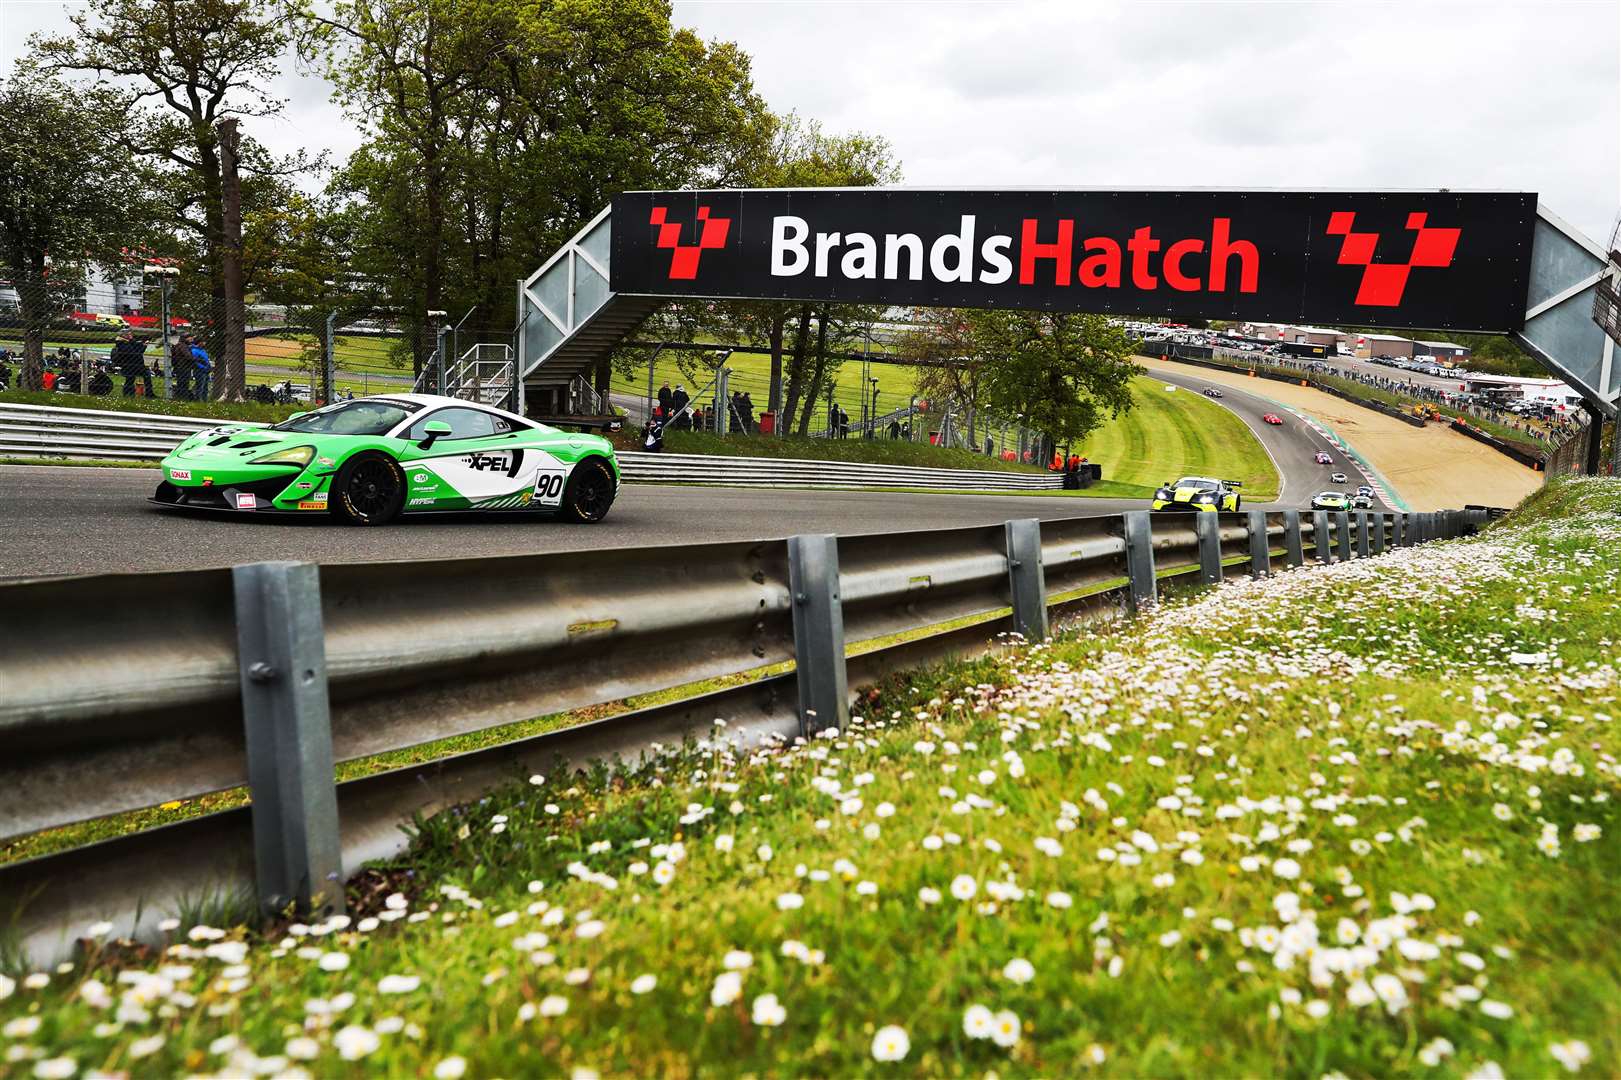 A petition has been launched asking Brands Hatch to rename a tunnel after Robert Foote